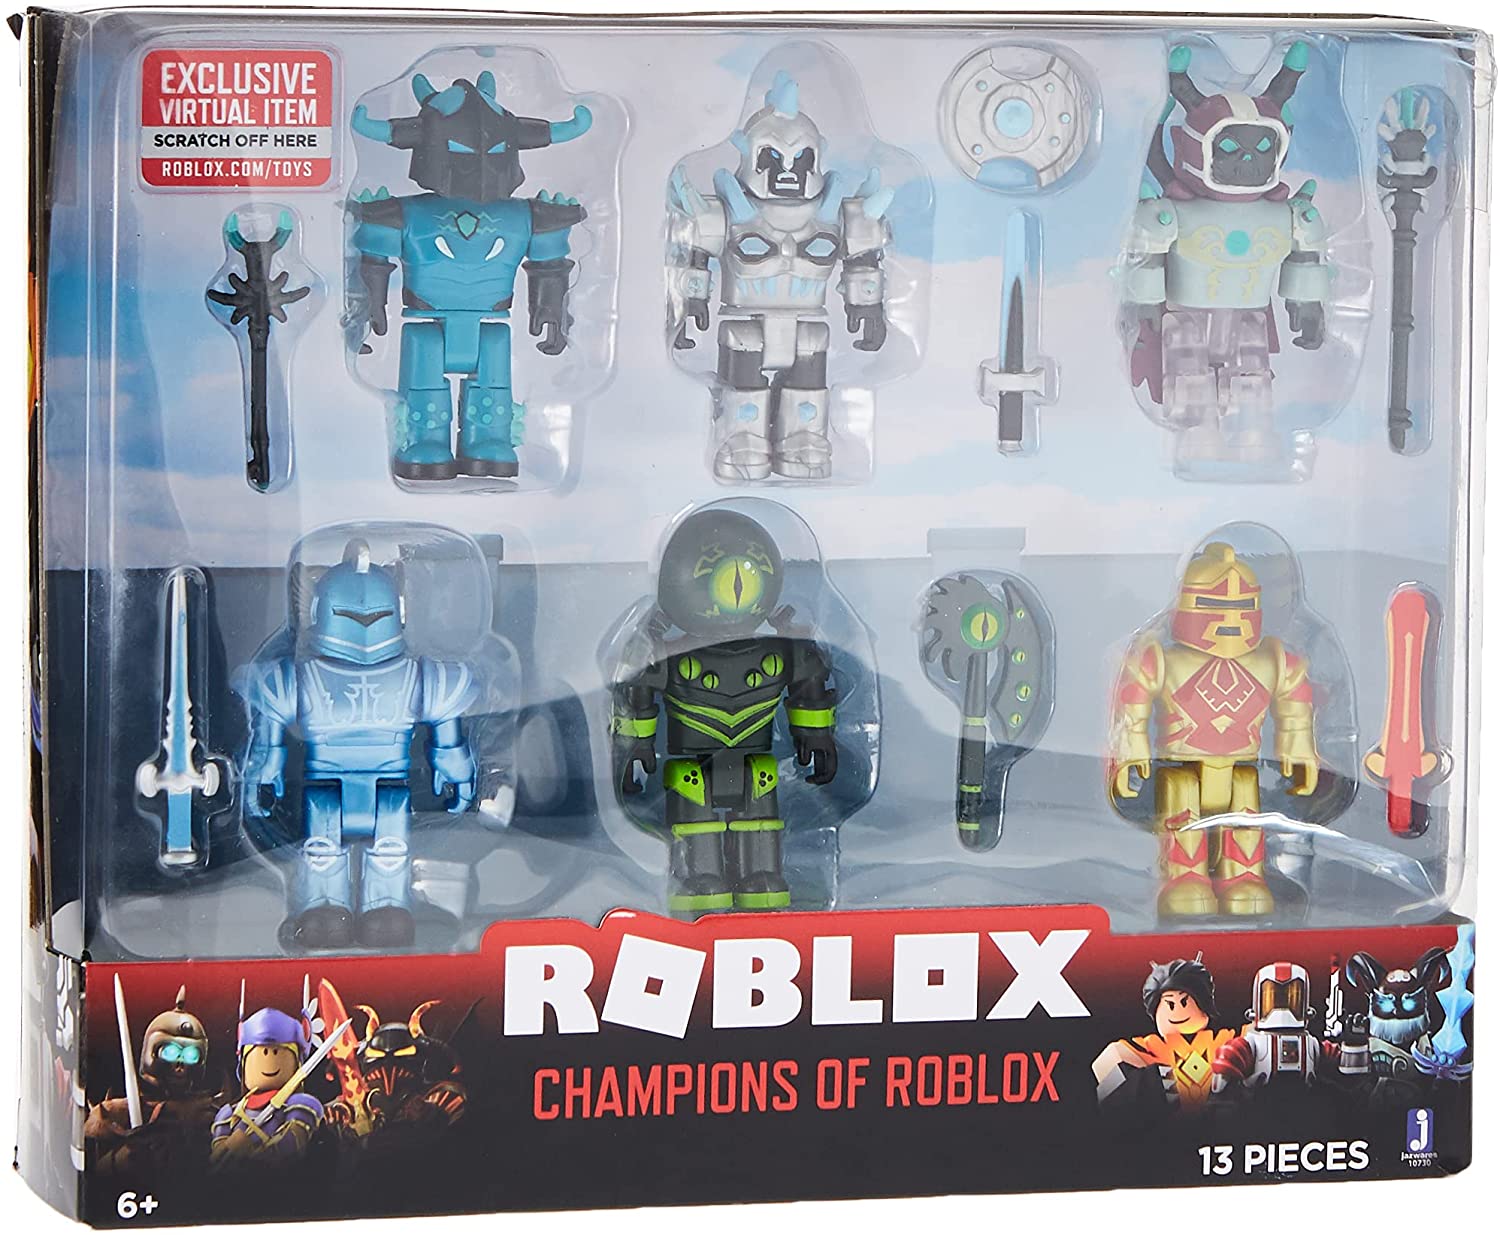 Wholesale Roblox Action Collection Champions Of Roblox Six Figure Pack Includes Exclusive Virtual Item Supply Leader Wholesale Supply - roblox champions 6 pack